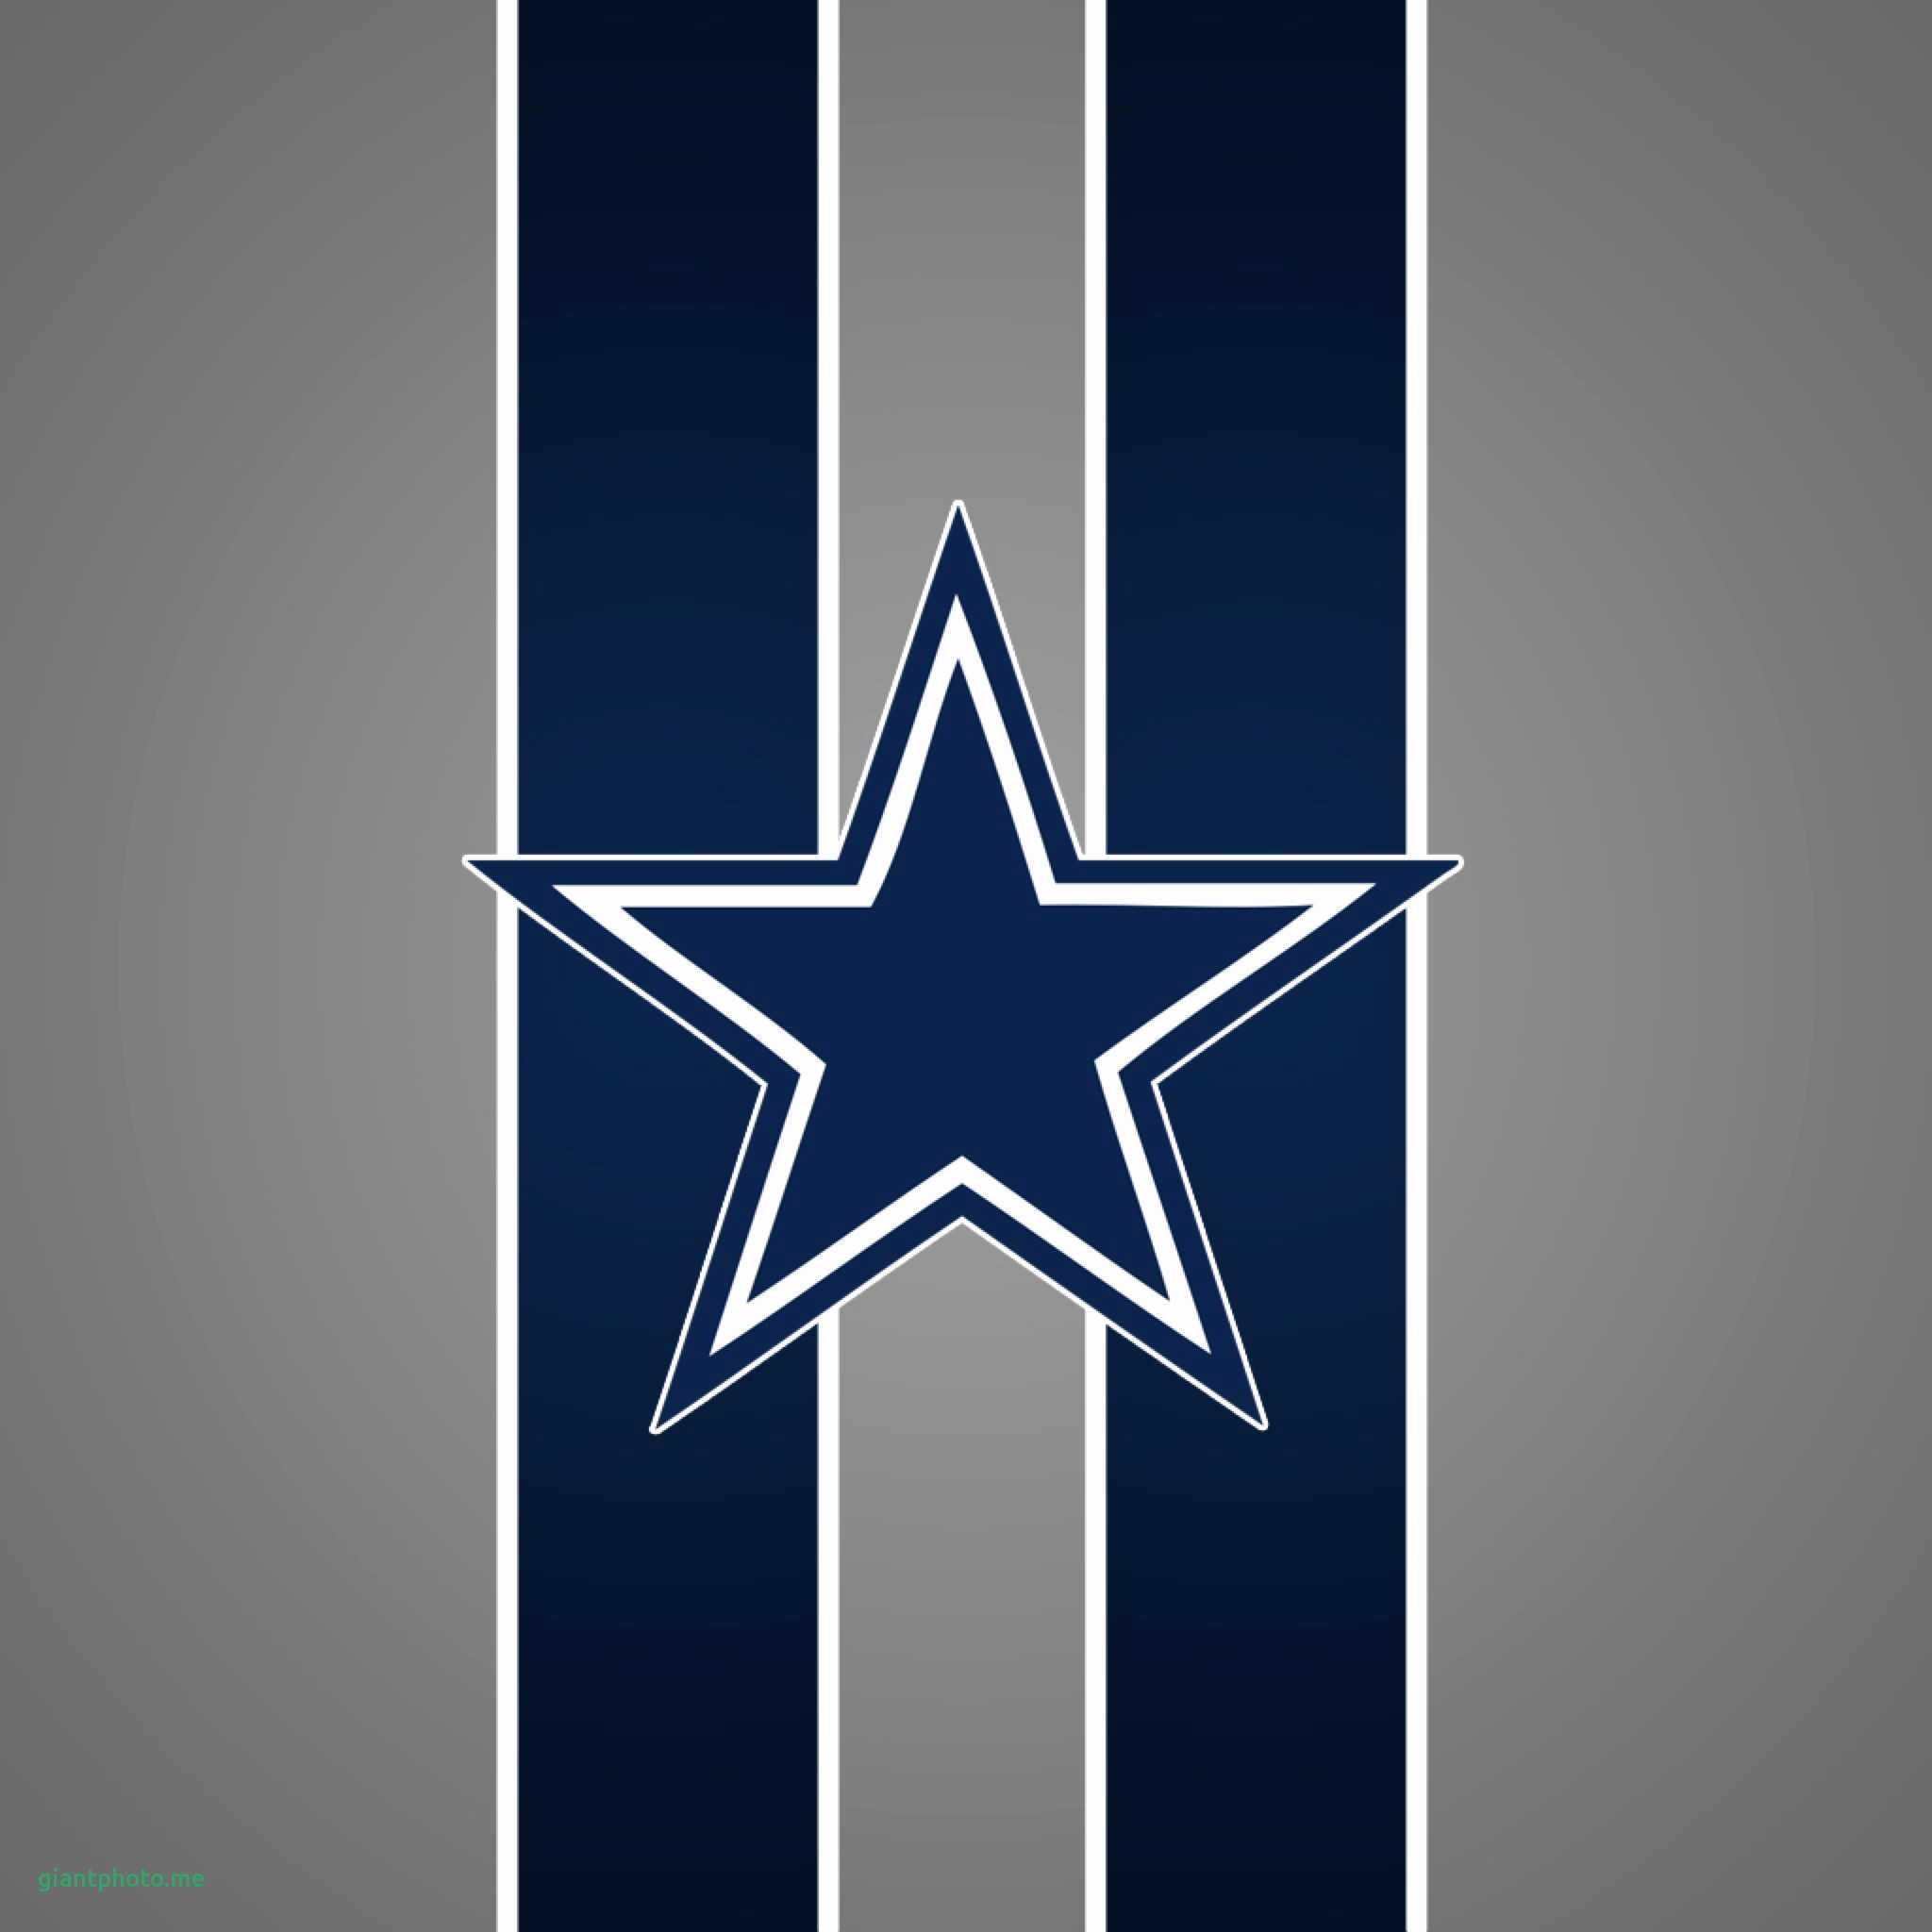 2048x2048 Hd Car Wallpapers for Ipad Air Awesome Dallas Cowboys Wallpapers 73  Background Pictures